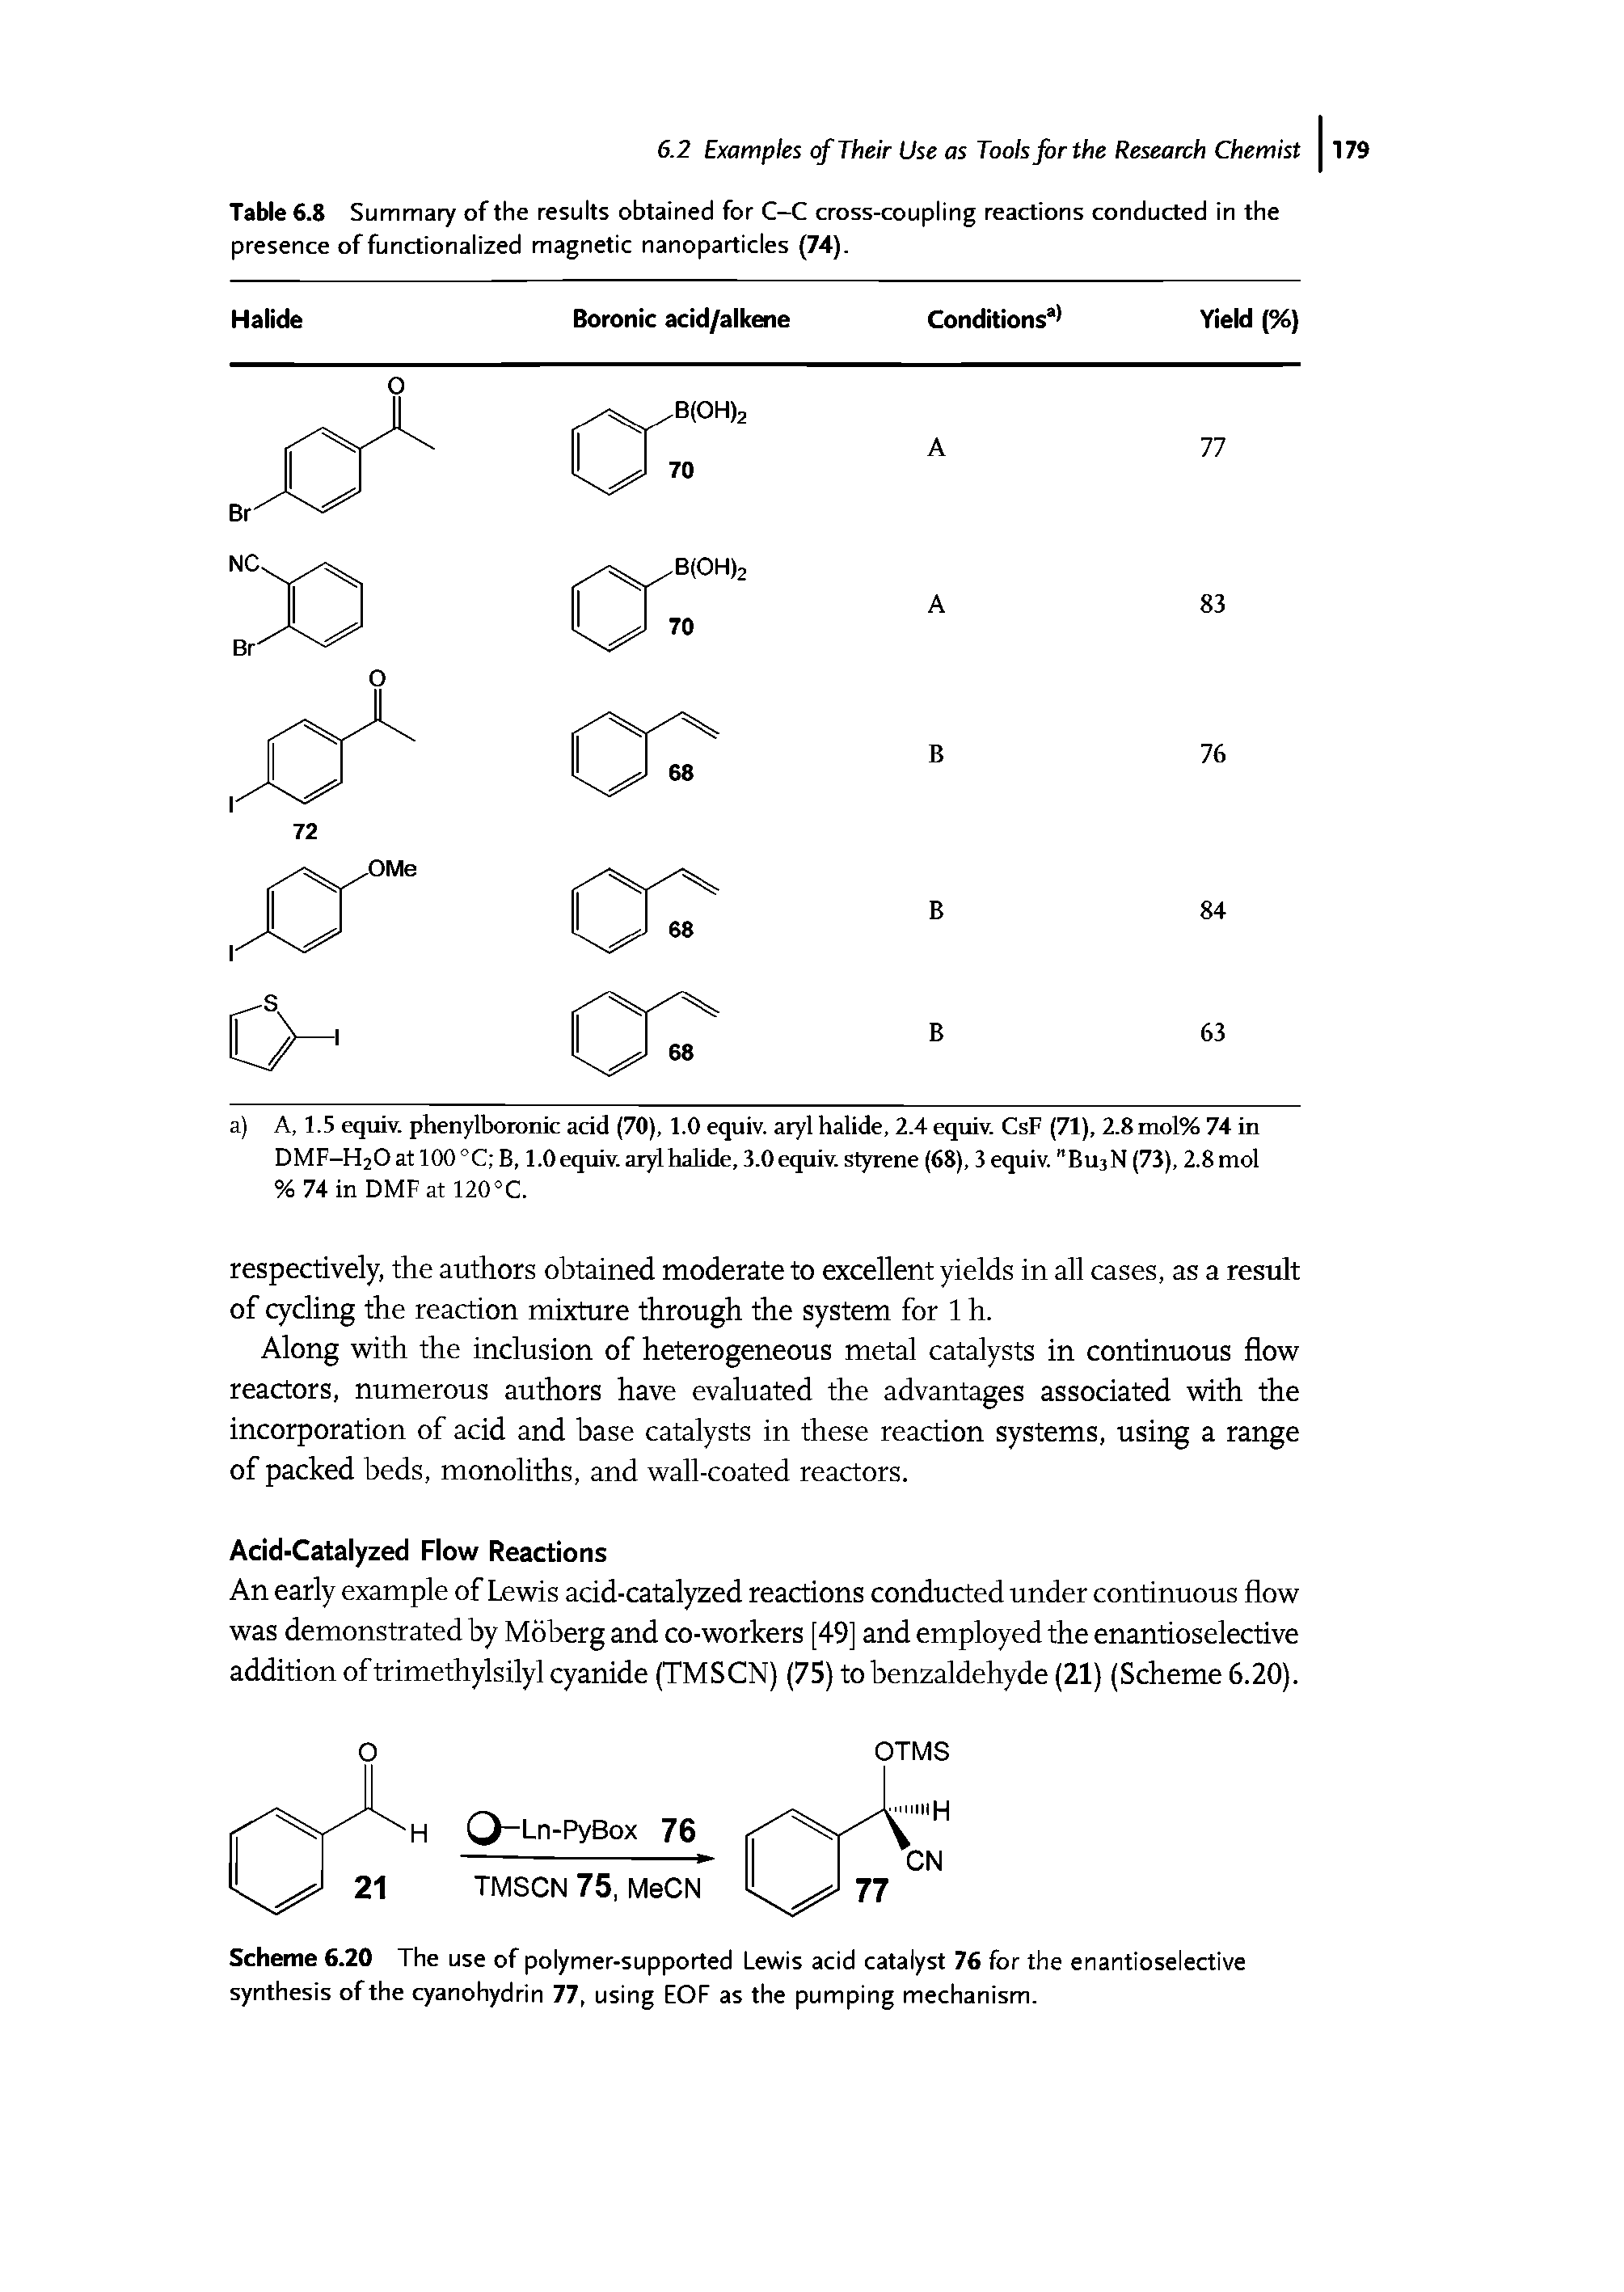 Table 6.8 Summary of the results obtained for C—C cross-coupling reactions conducted in the presence of functionalized magnetic nanoparticles (74).